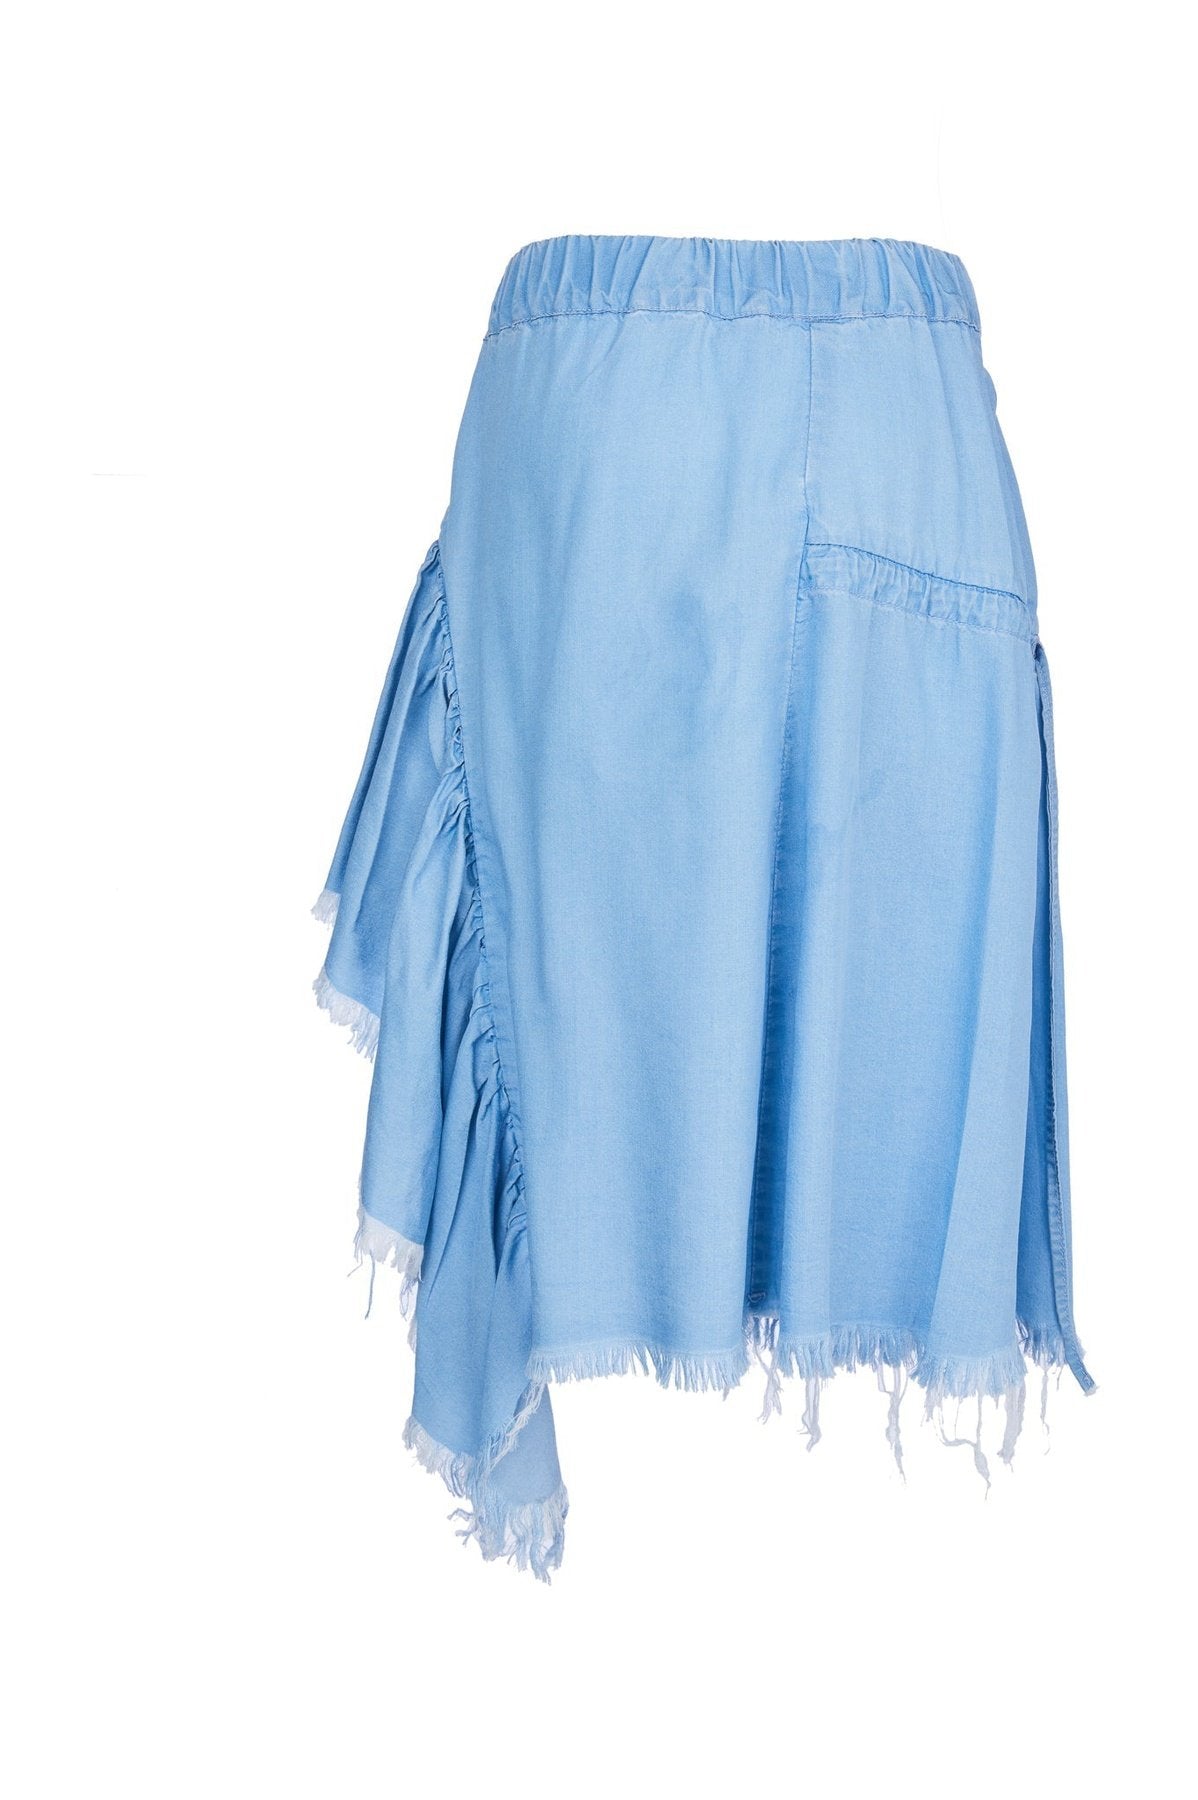 M'A KIDS GATHERED SKIRT IN BABY BLUE